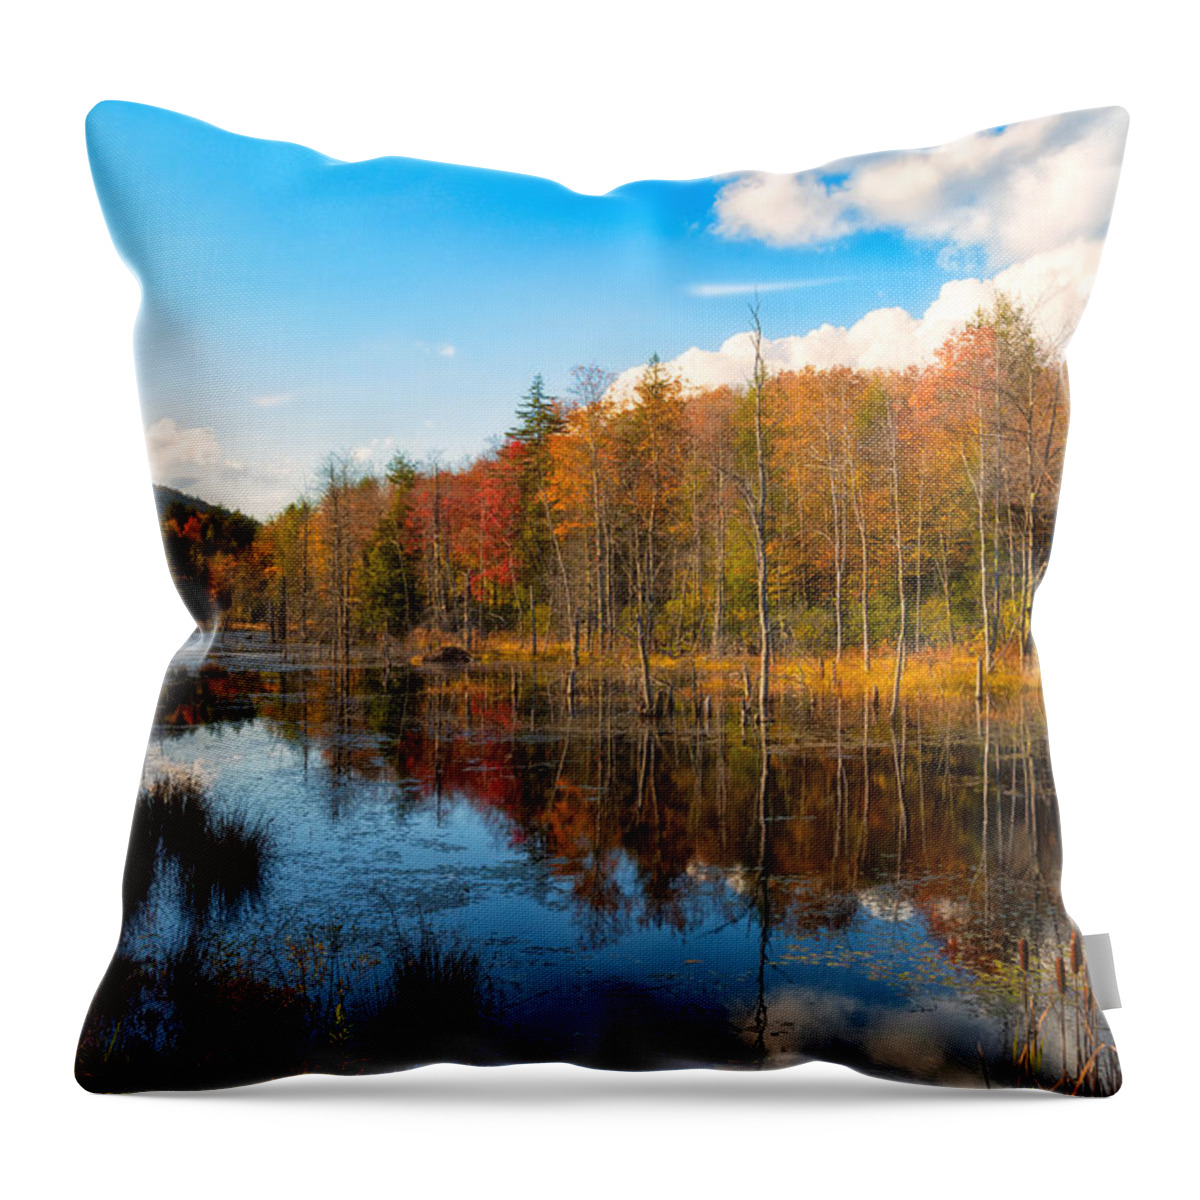 Fall Reflections Throw Pillow featuring the photograph Fall Reflections by Russell Pugh